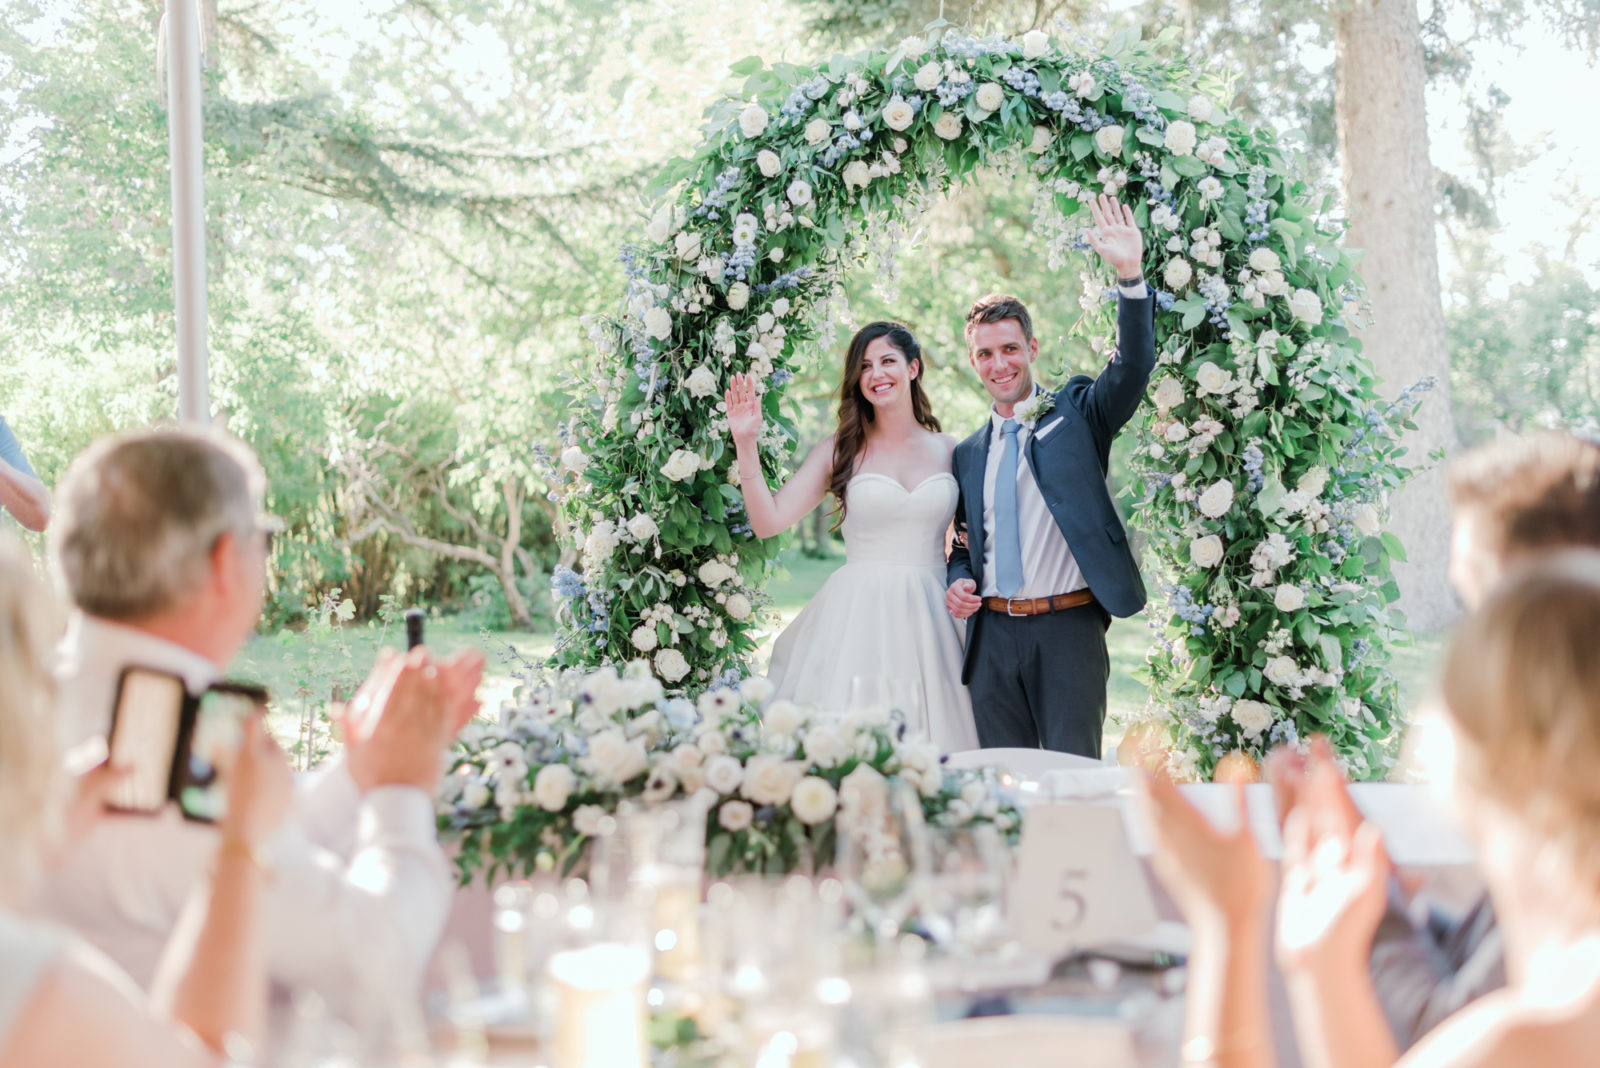 Timeless fine art summer wedding reception decor with a show-stopping white and blue floral arch